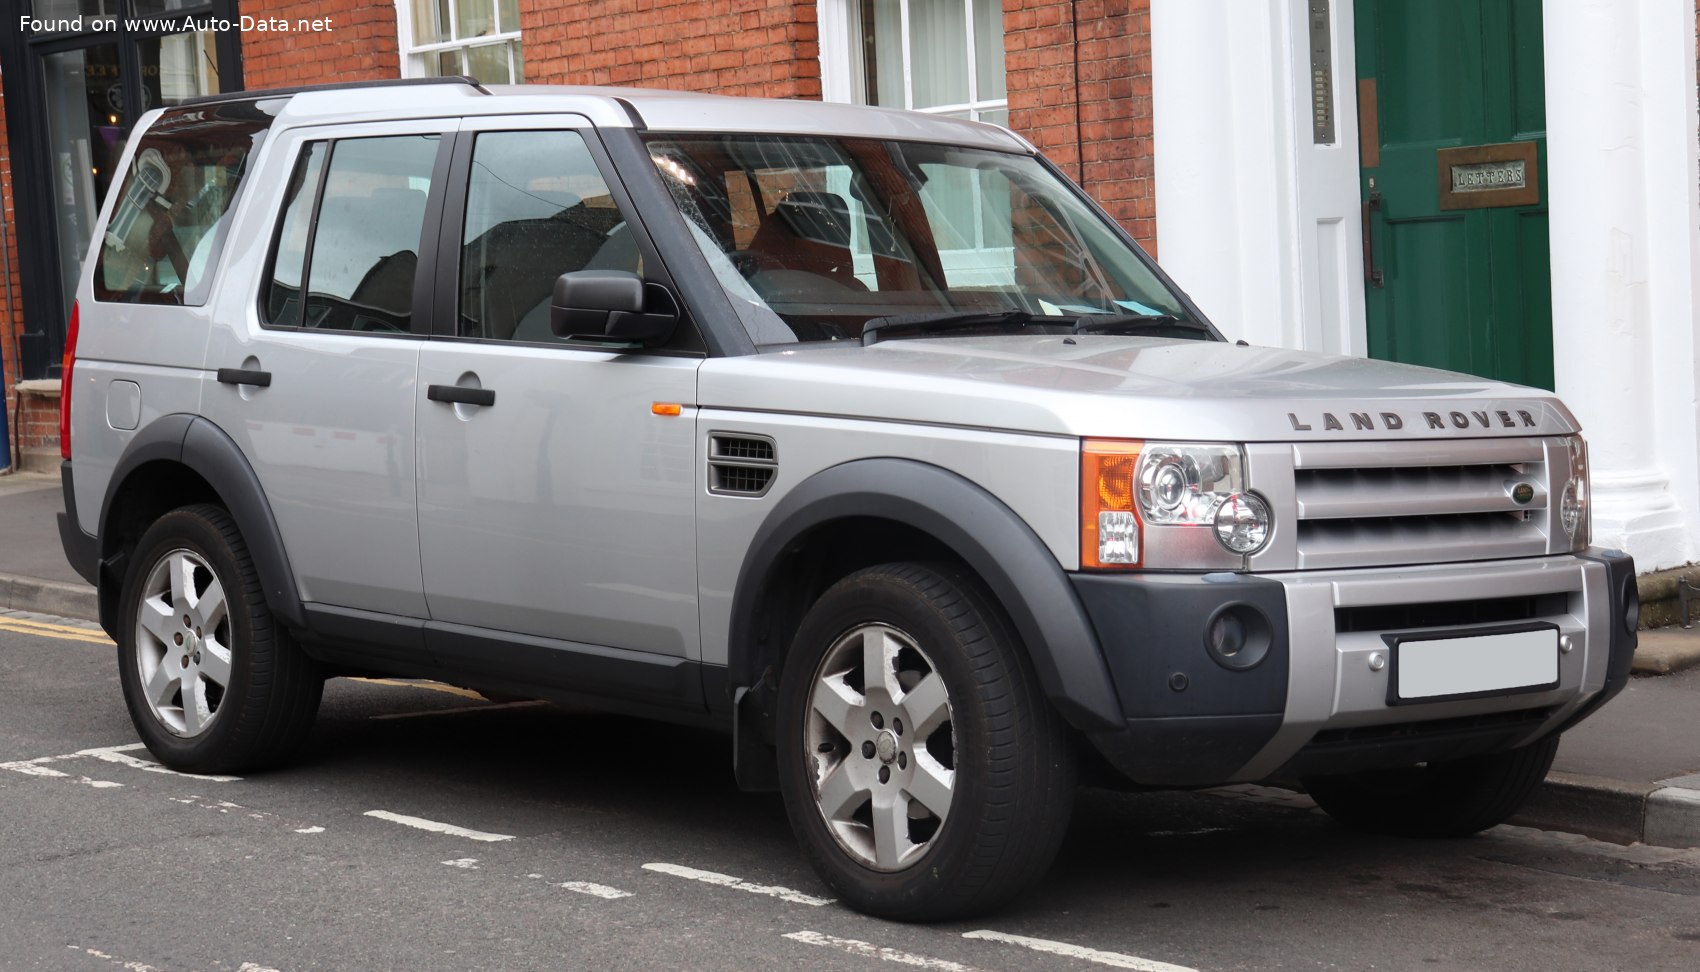 2004 Land Rover Discovery III 2.7 TDI (190 PS